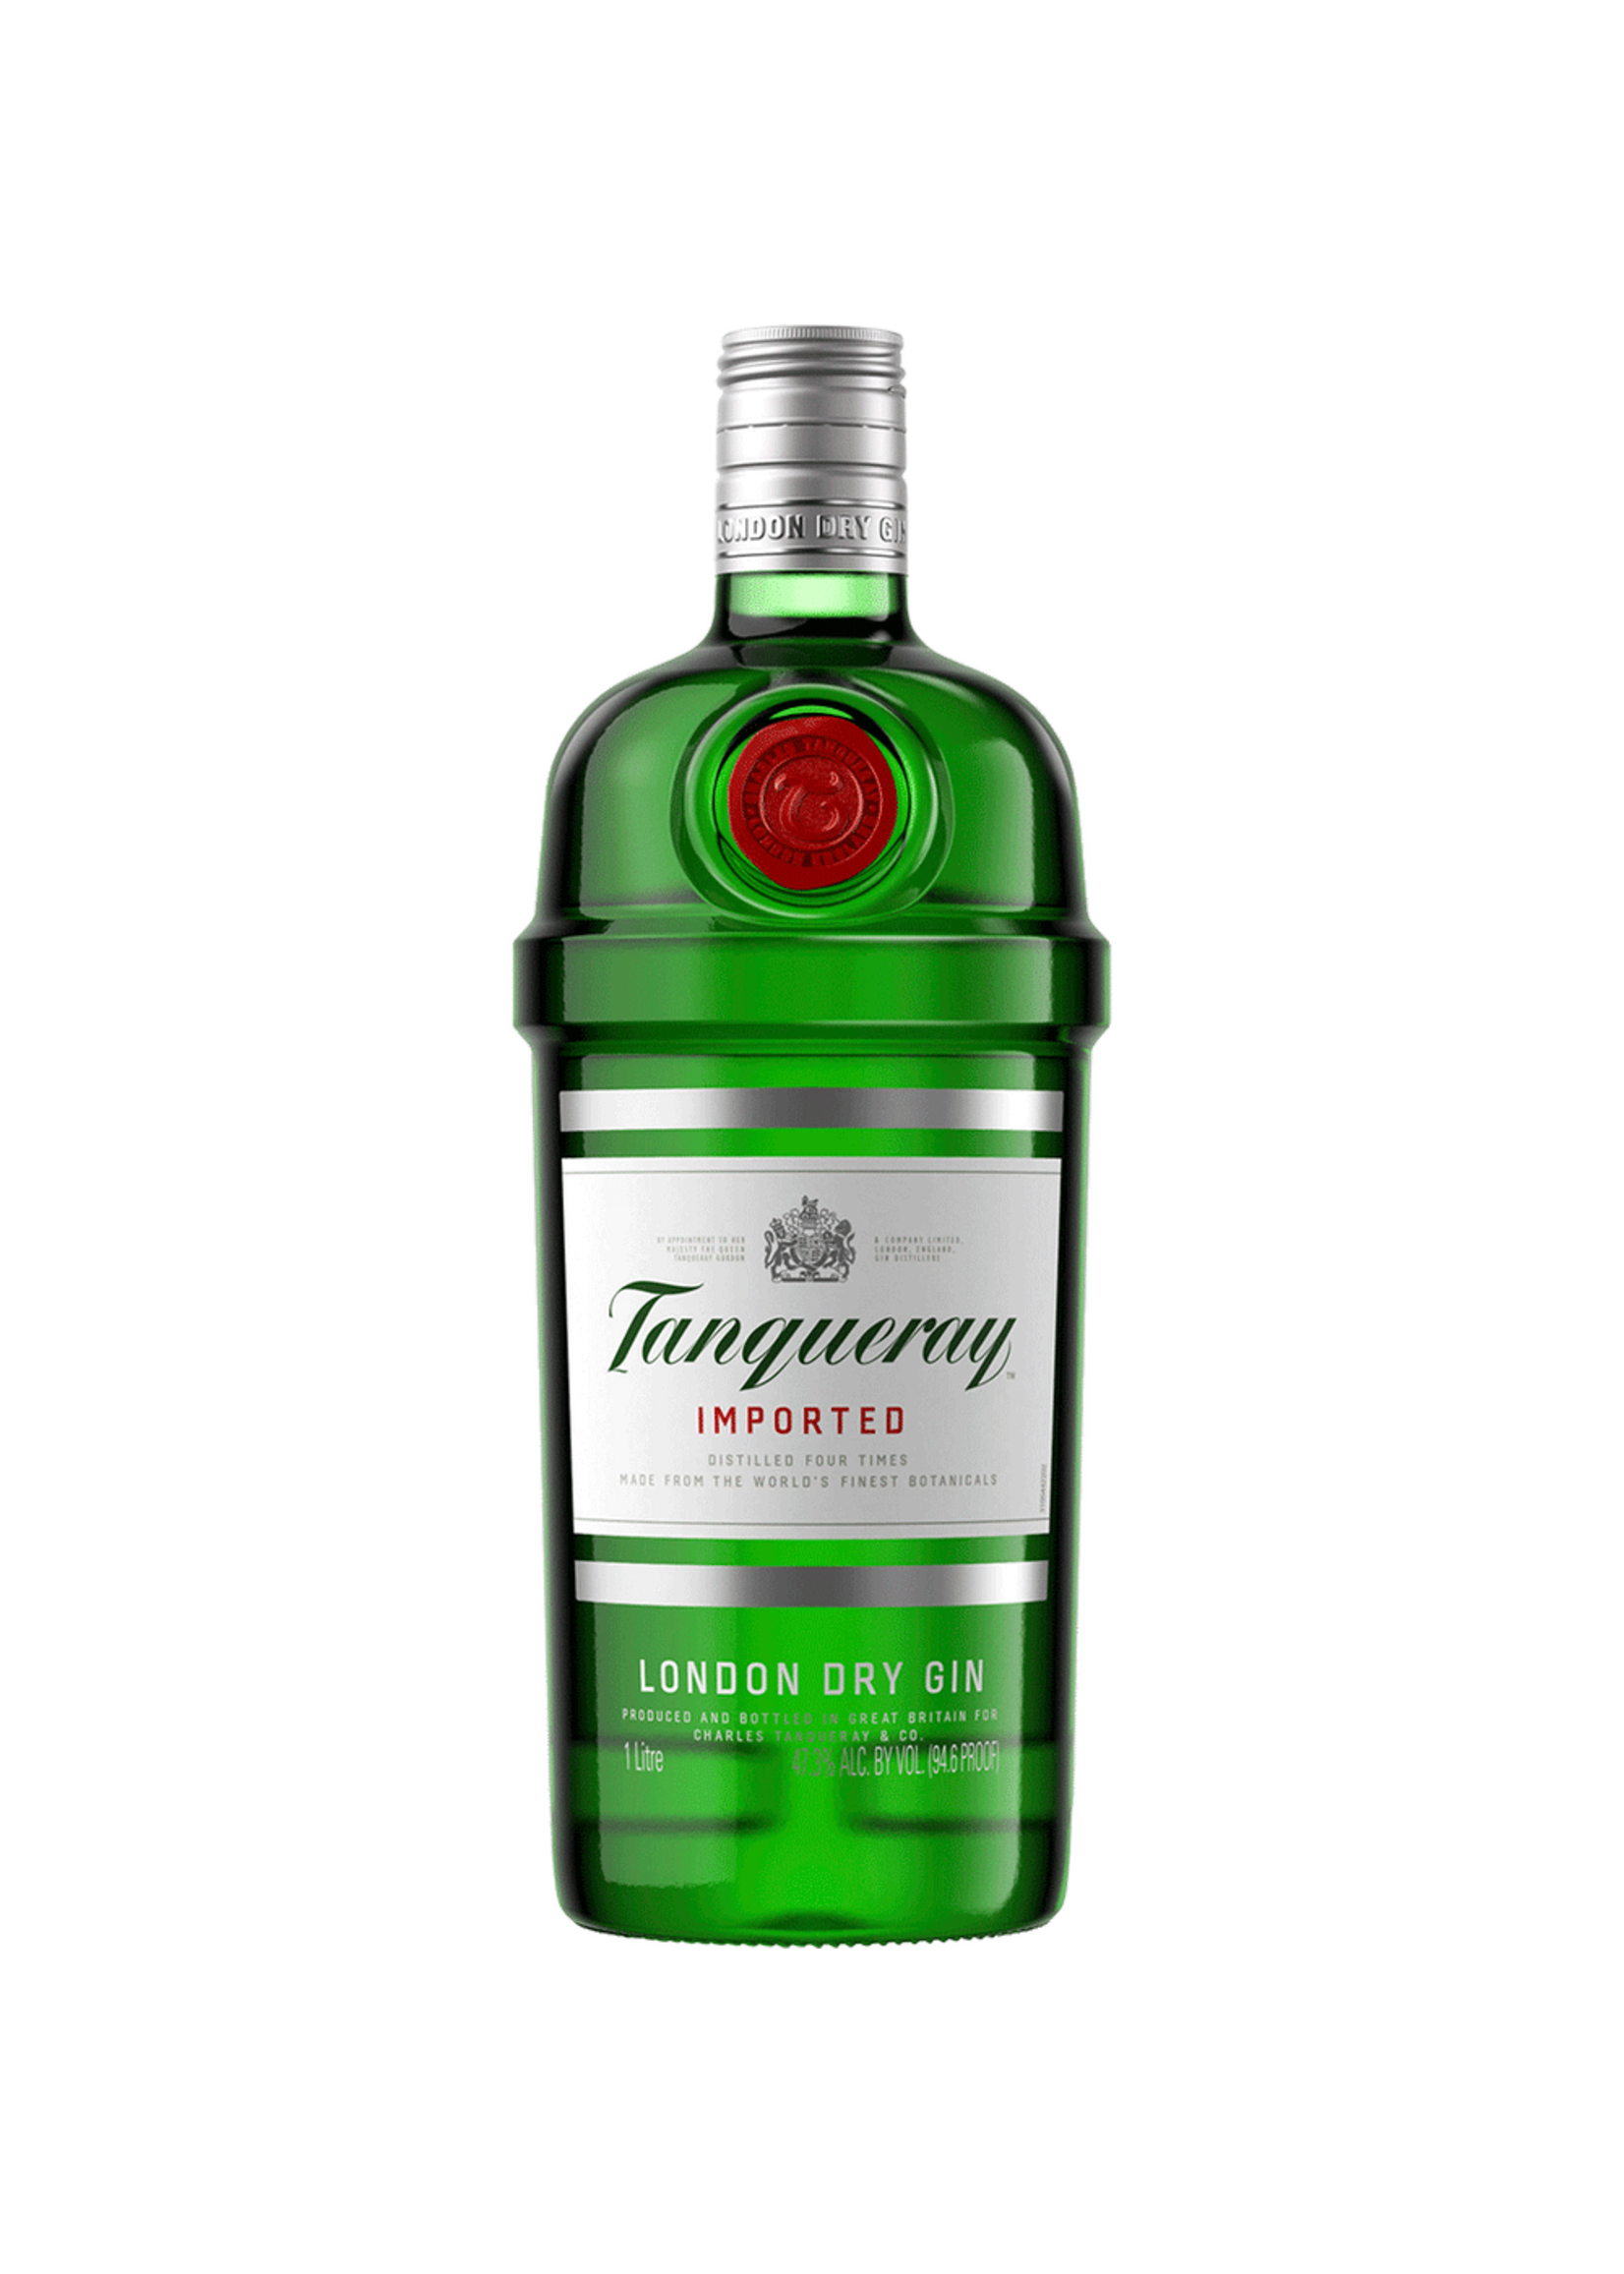 Tanqueray London Dry Gin 94.6Proof 1 Ltr